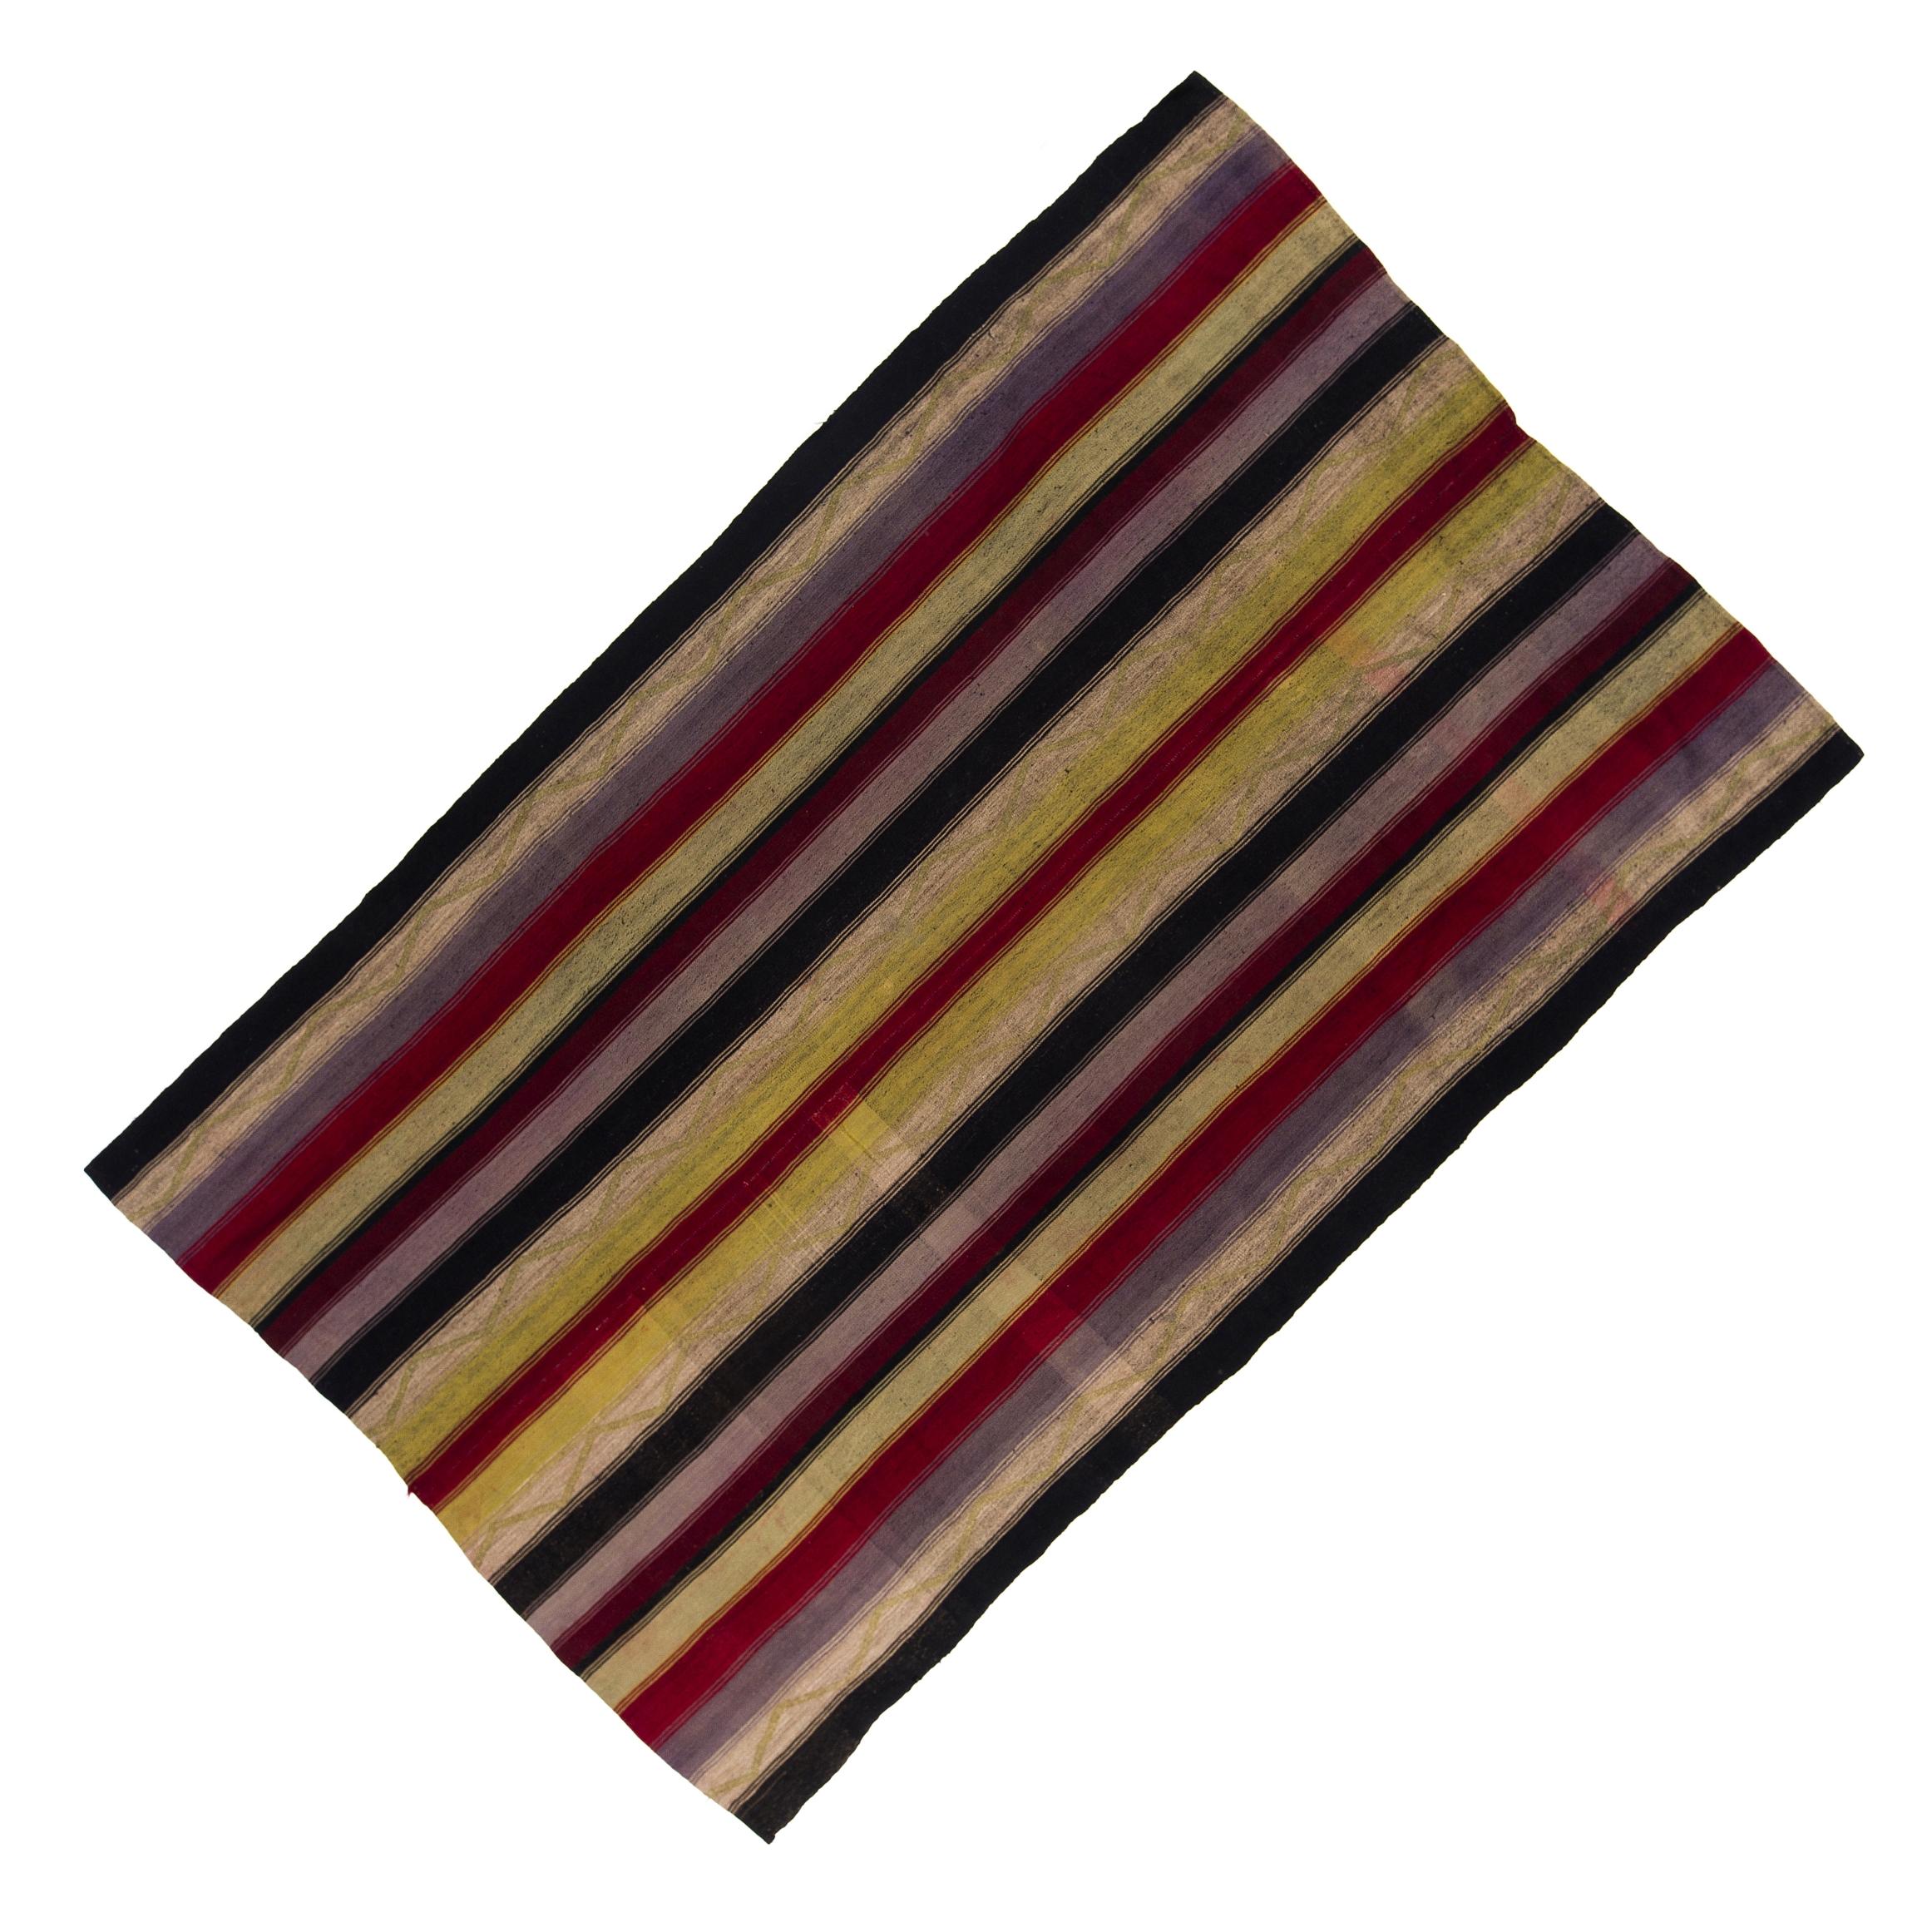 Late 20th Century 6.2x10 Ft Vintage Striped Colorful Kilim, Hand-Woven Wool Carpet. Flat-weave Rug For Sale